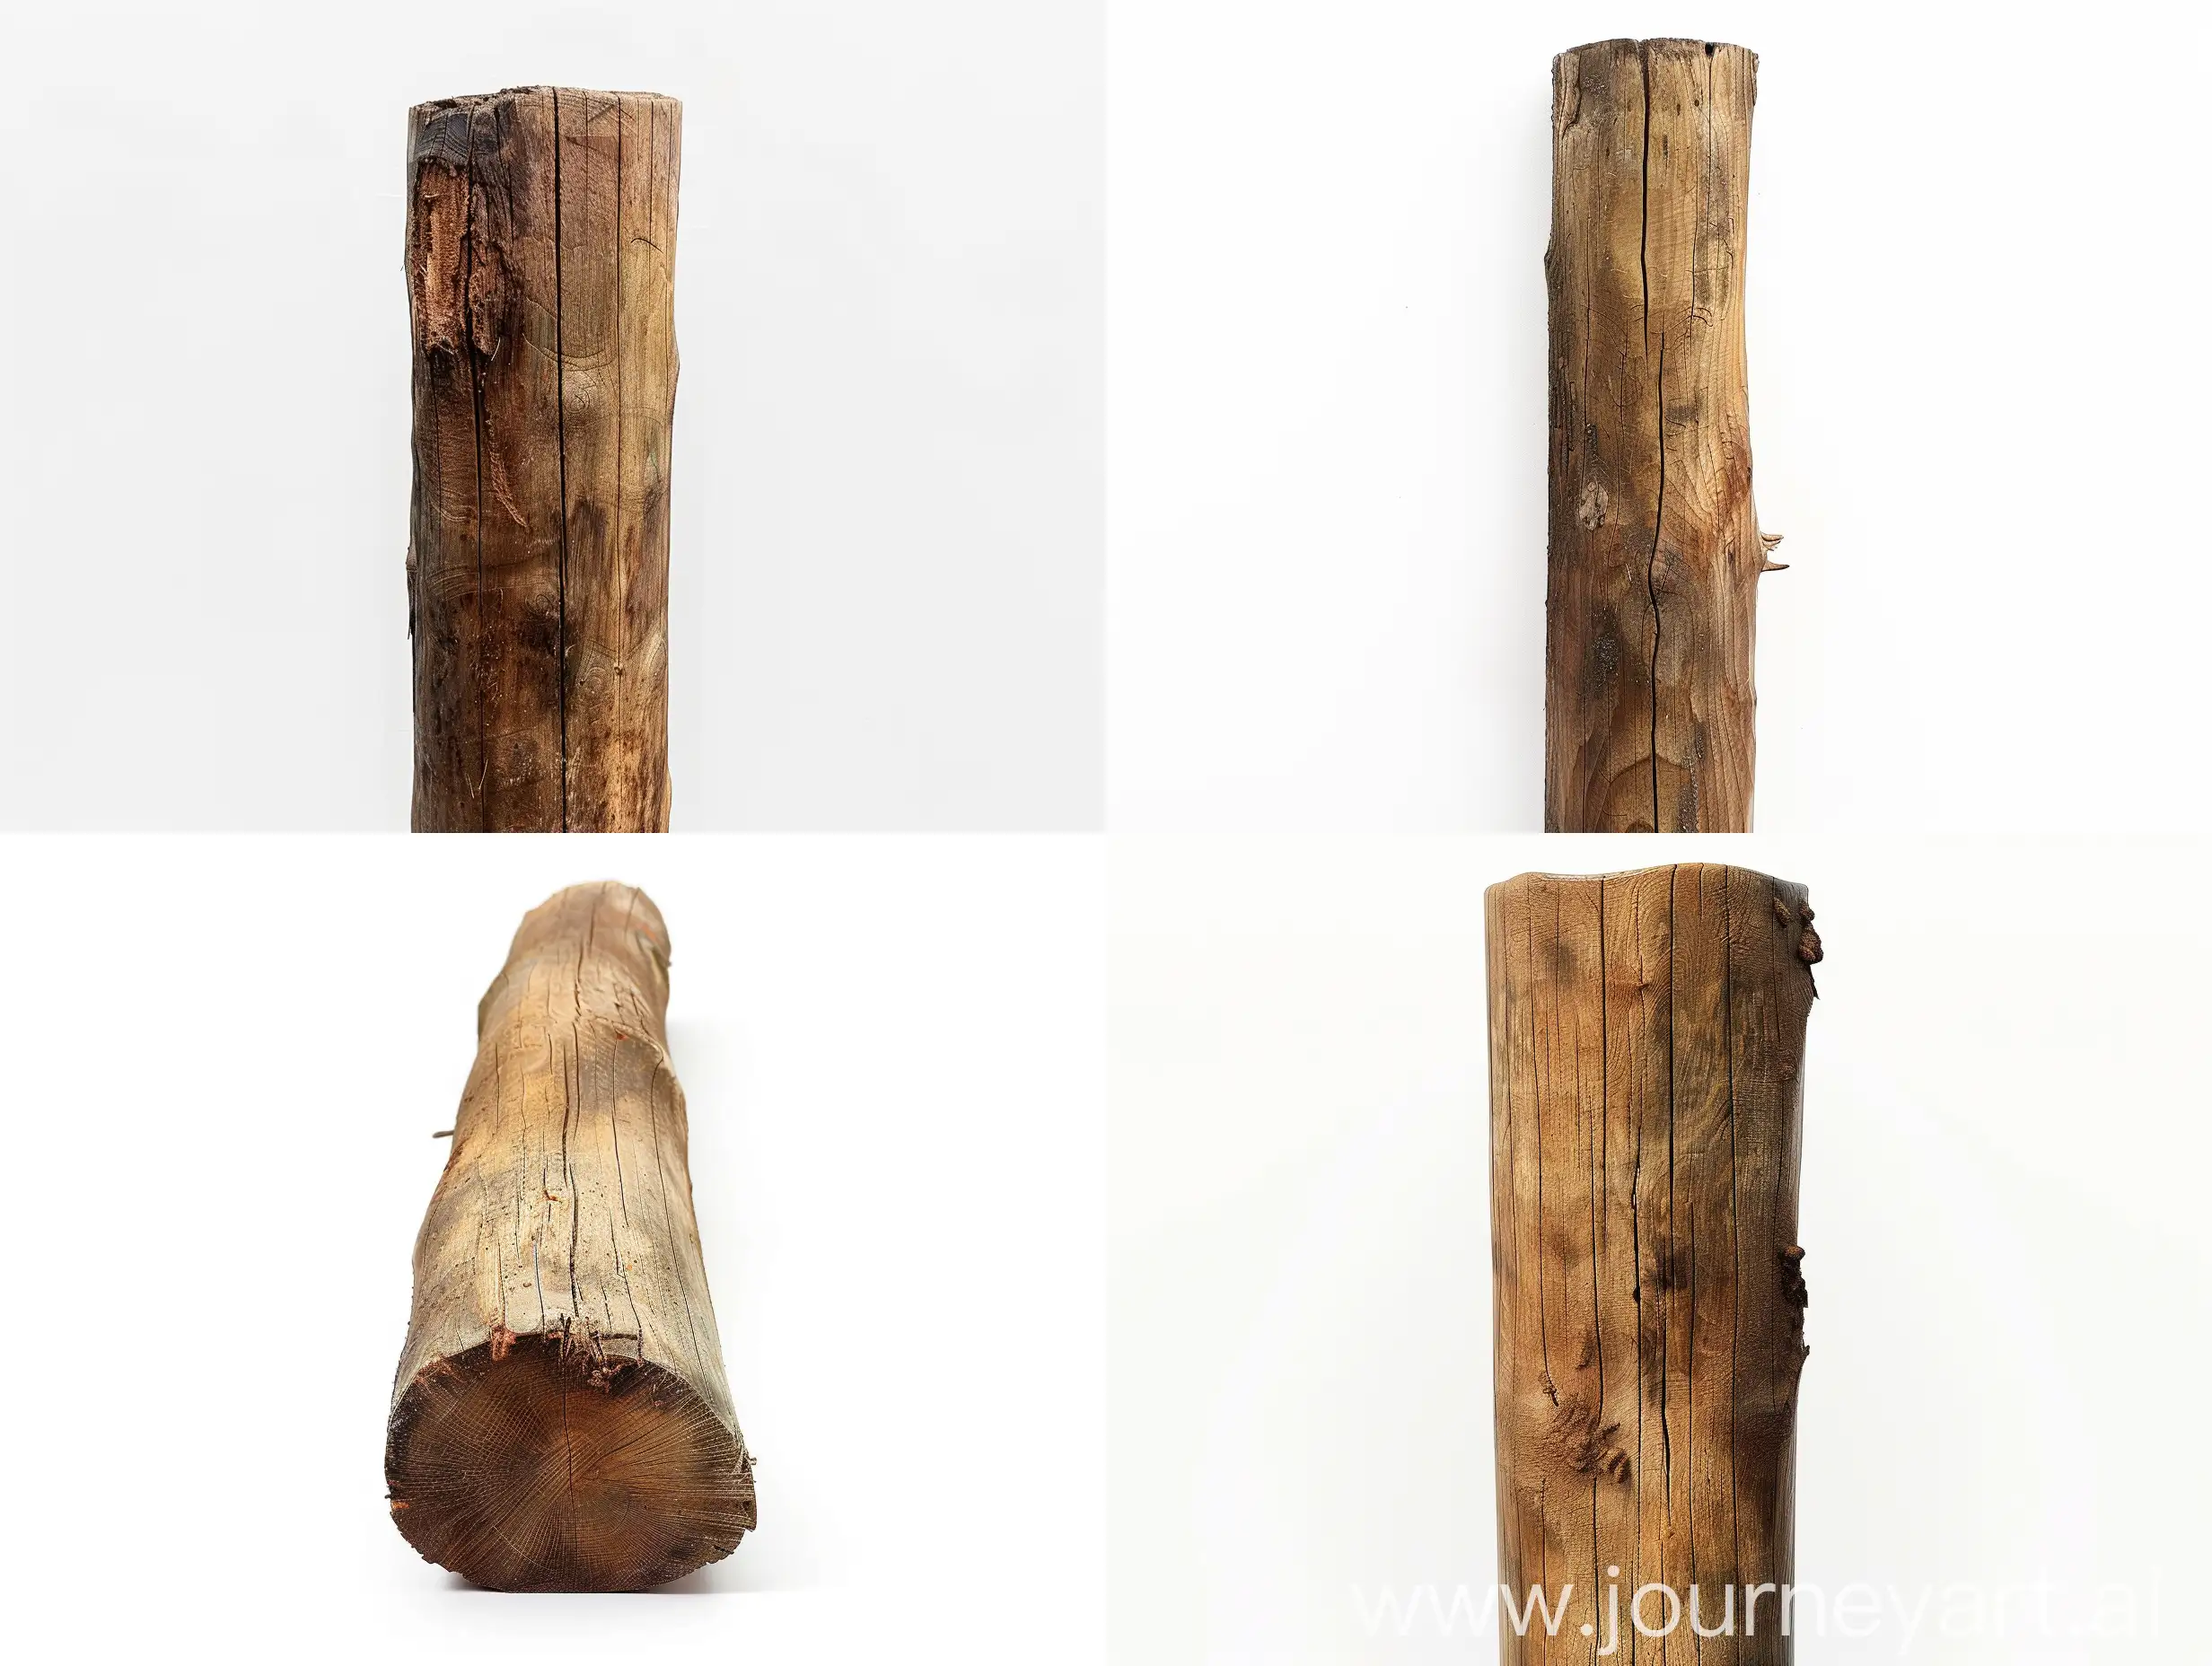 Wooden-Pole-on-White-Background-Alpha-Channel